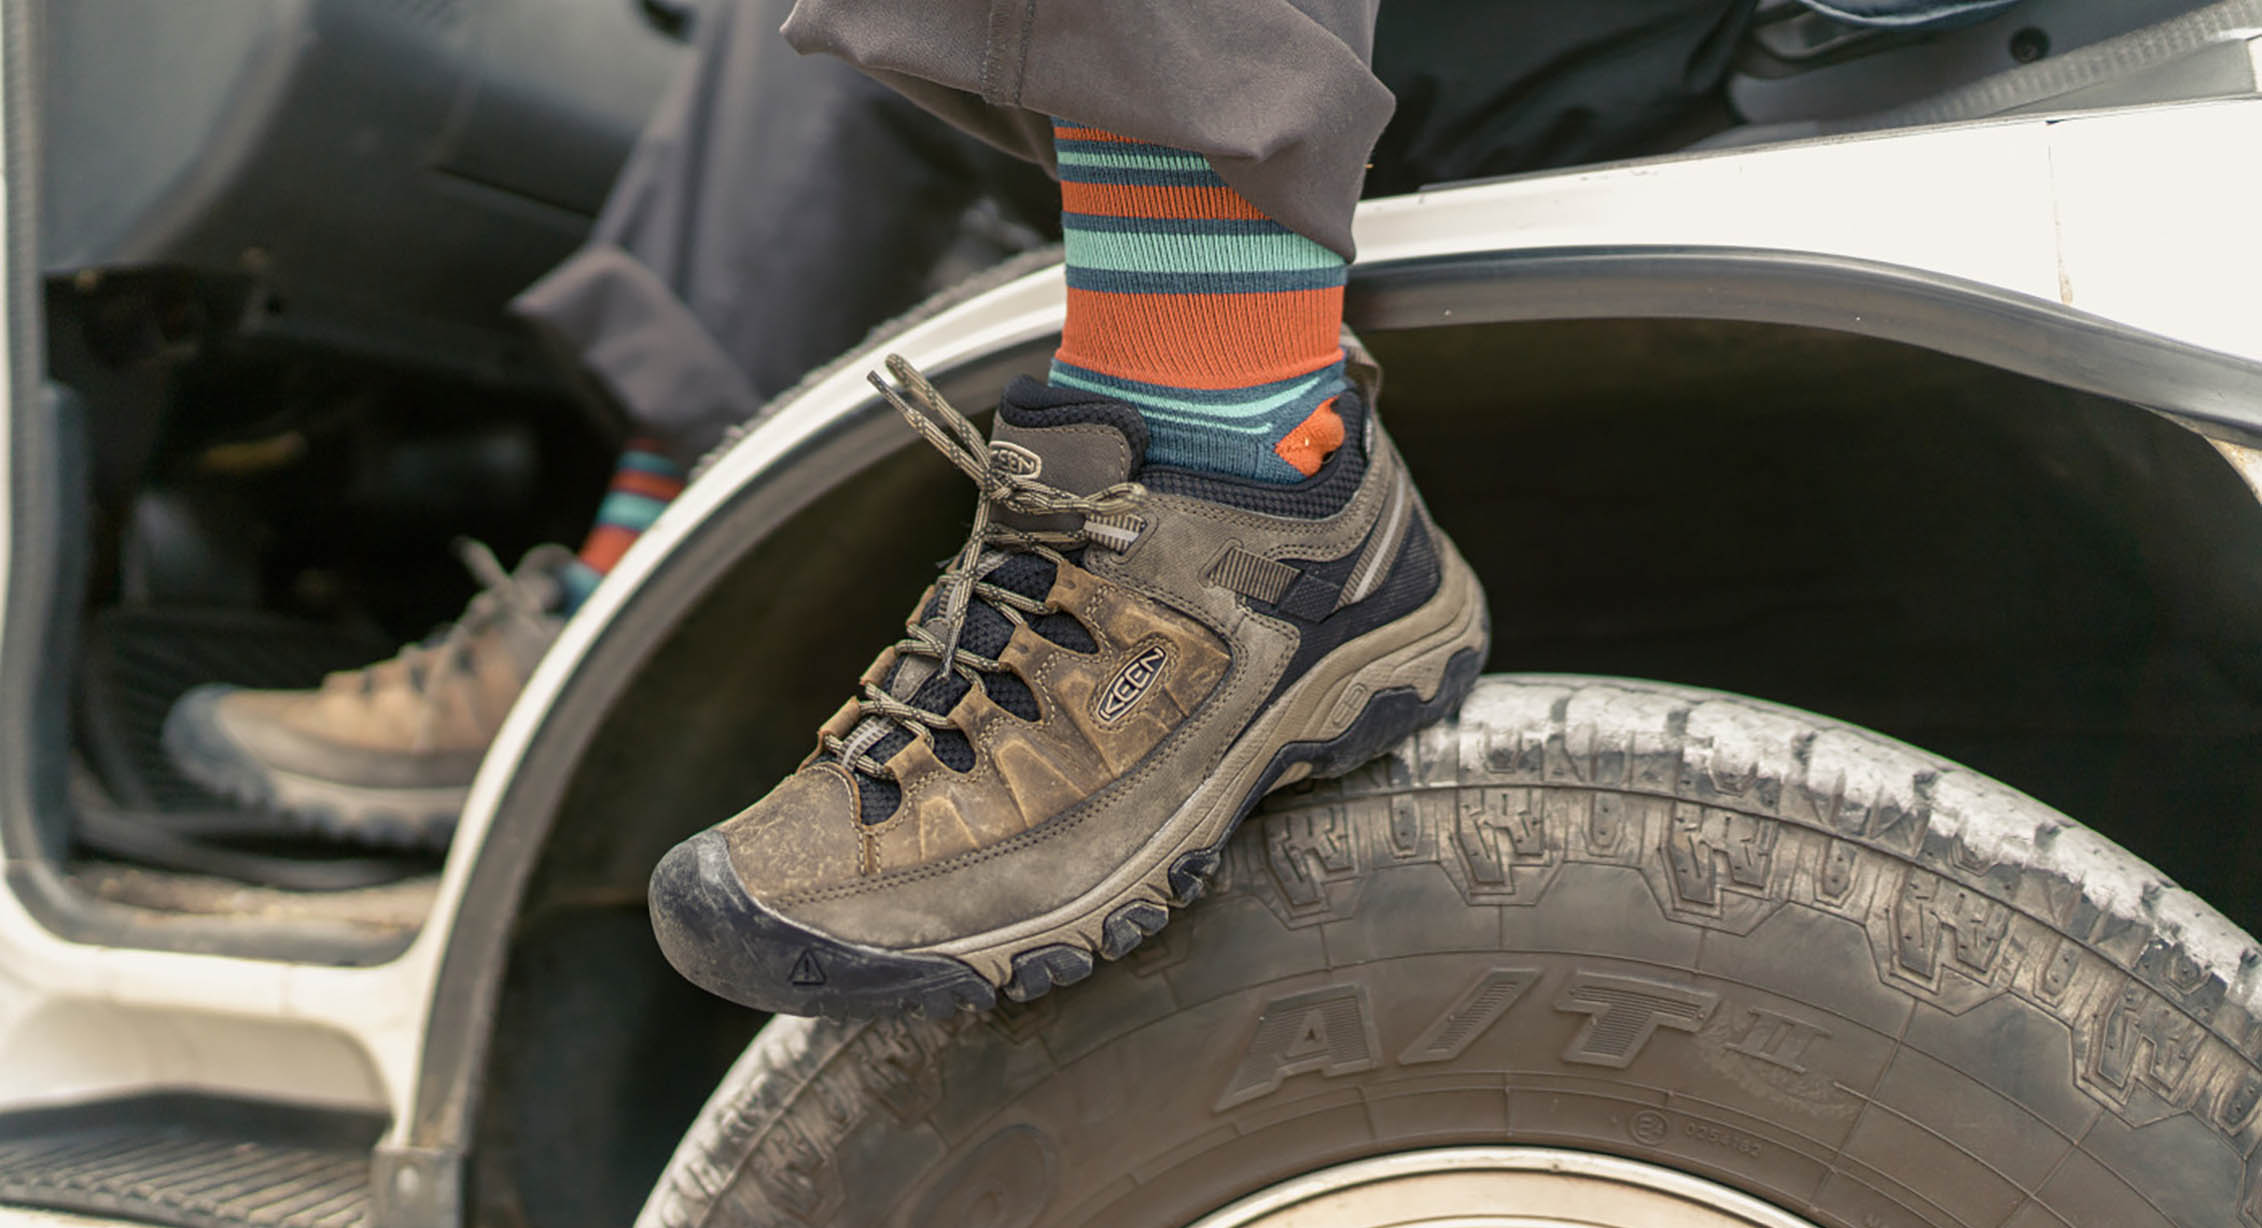 KEEN hiking shoes on a truck tire